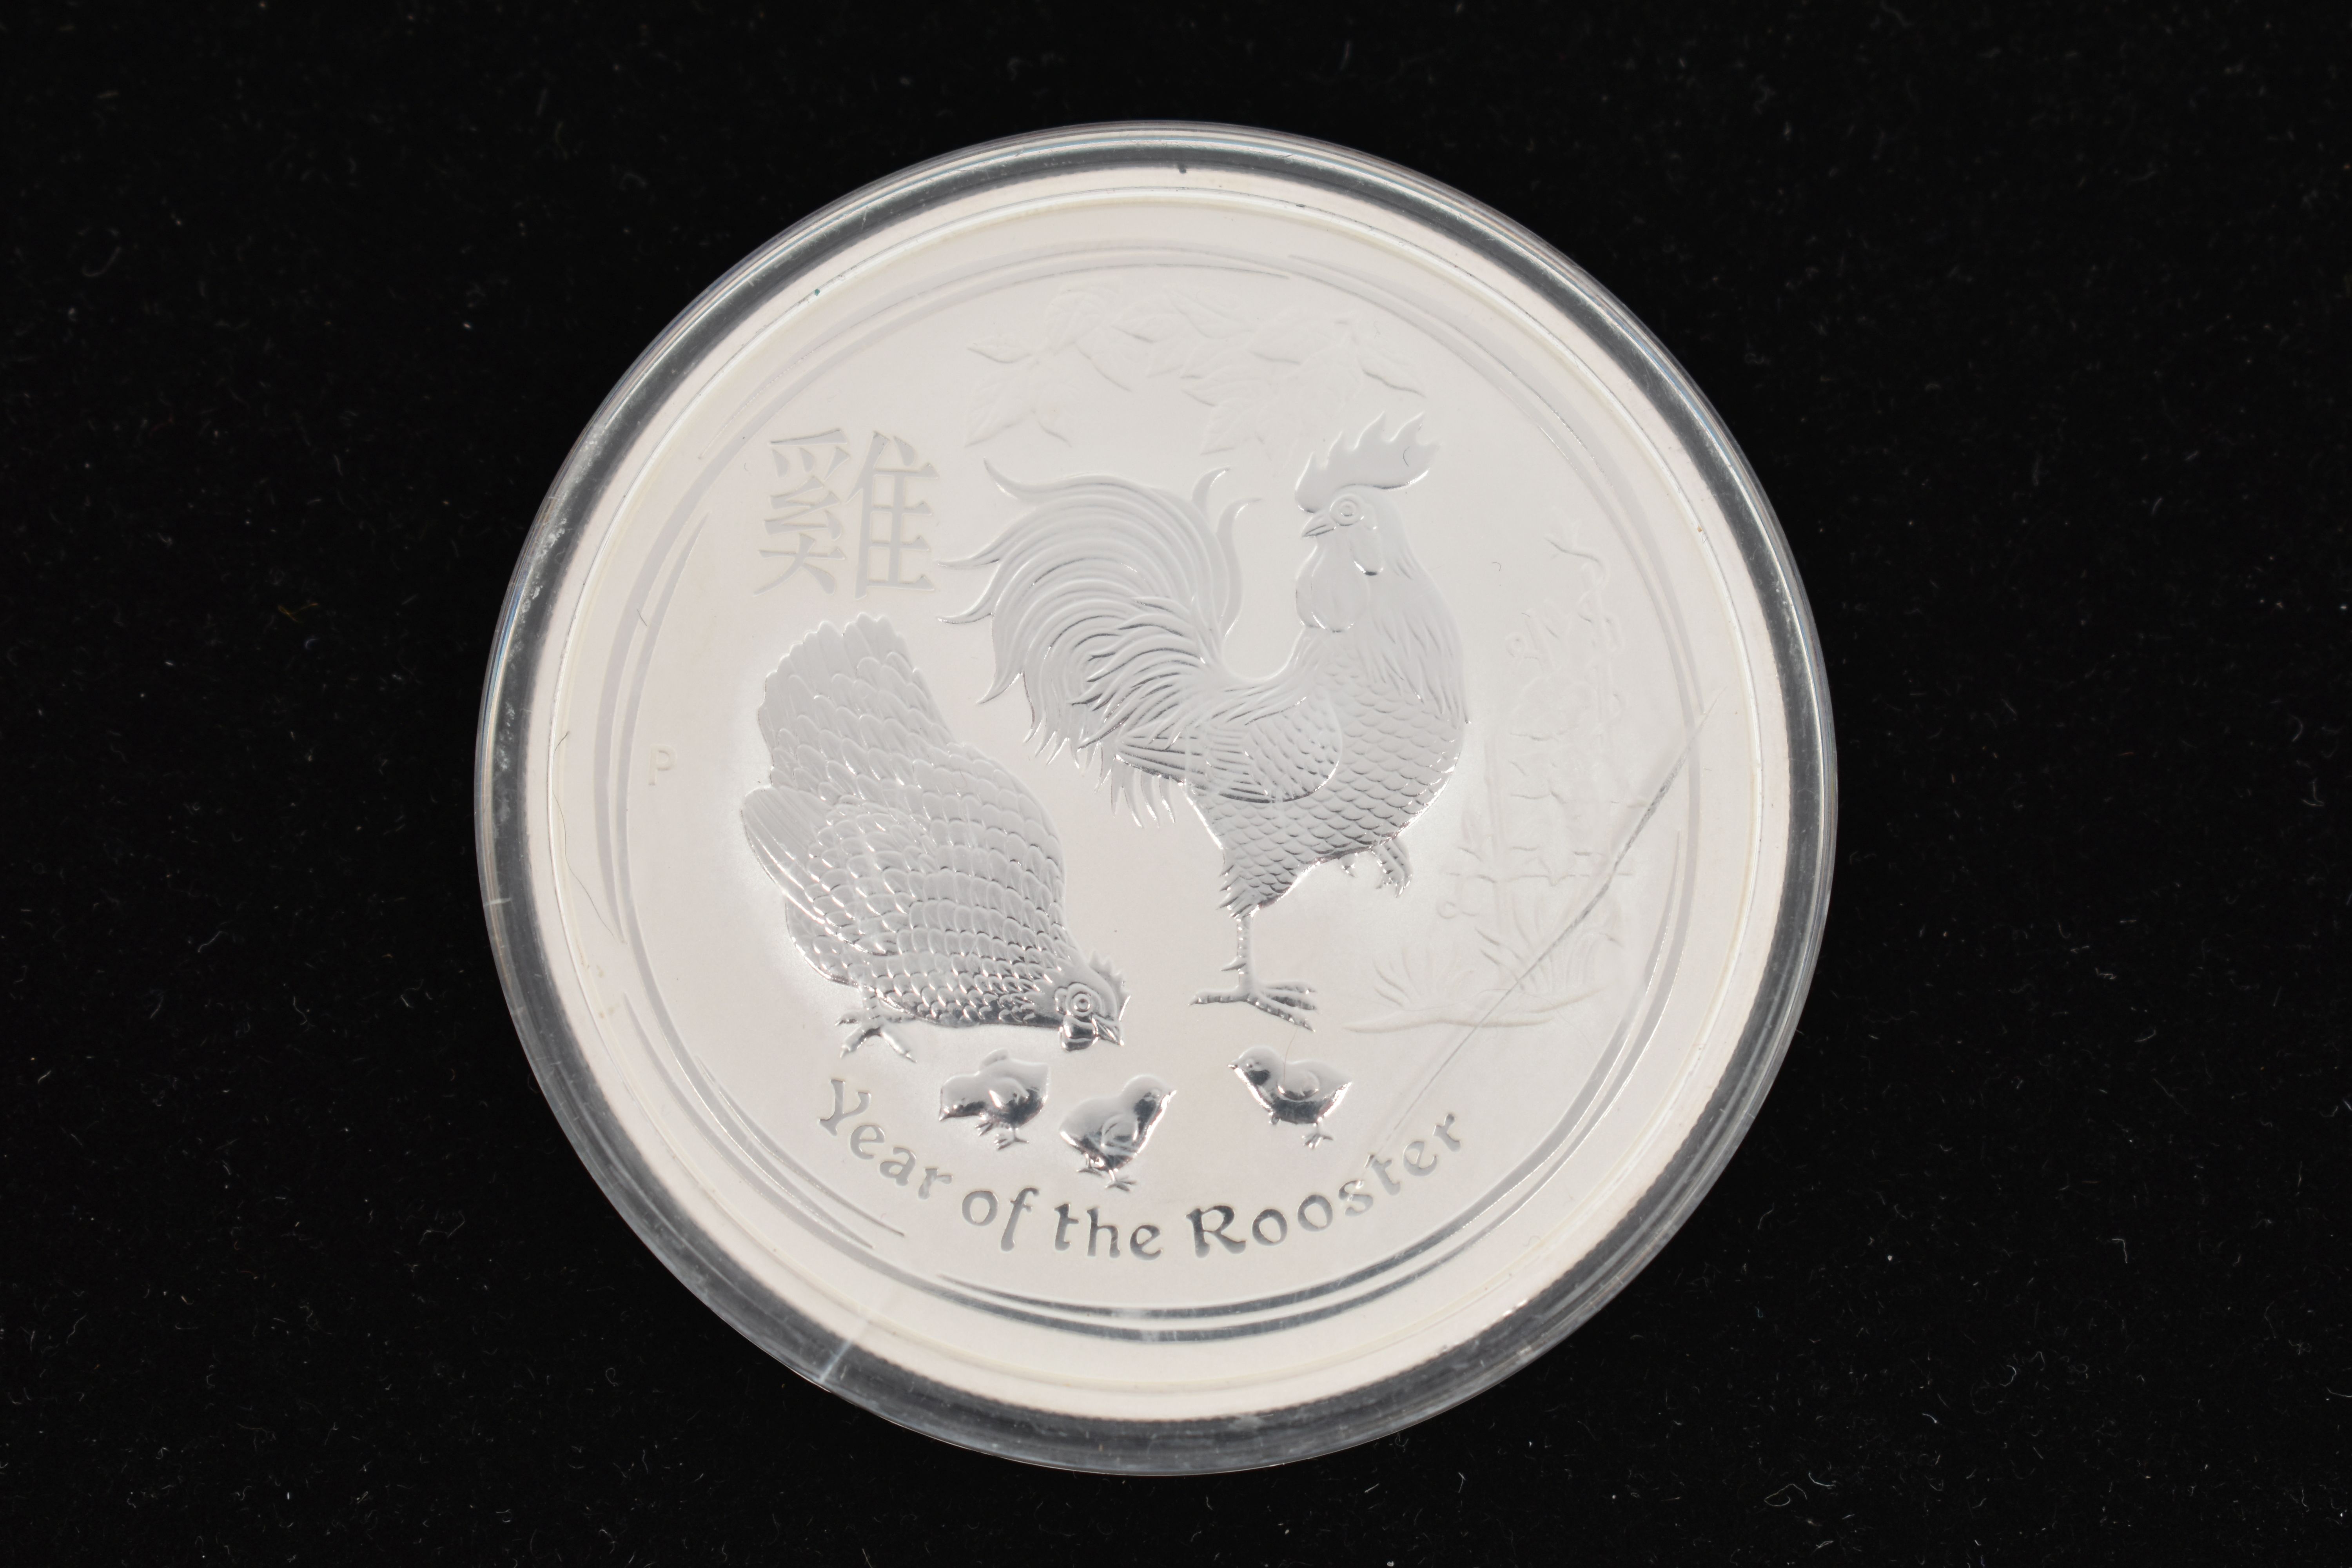 AN ELIZABETH II, AUSTRALIA 2OZ 9999 AG 2 DOLLAR COIN, dated 2017, 'Year of The Rooster', in a